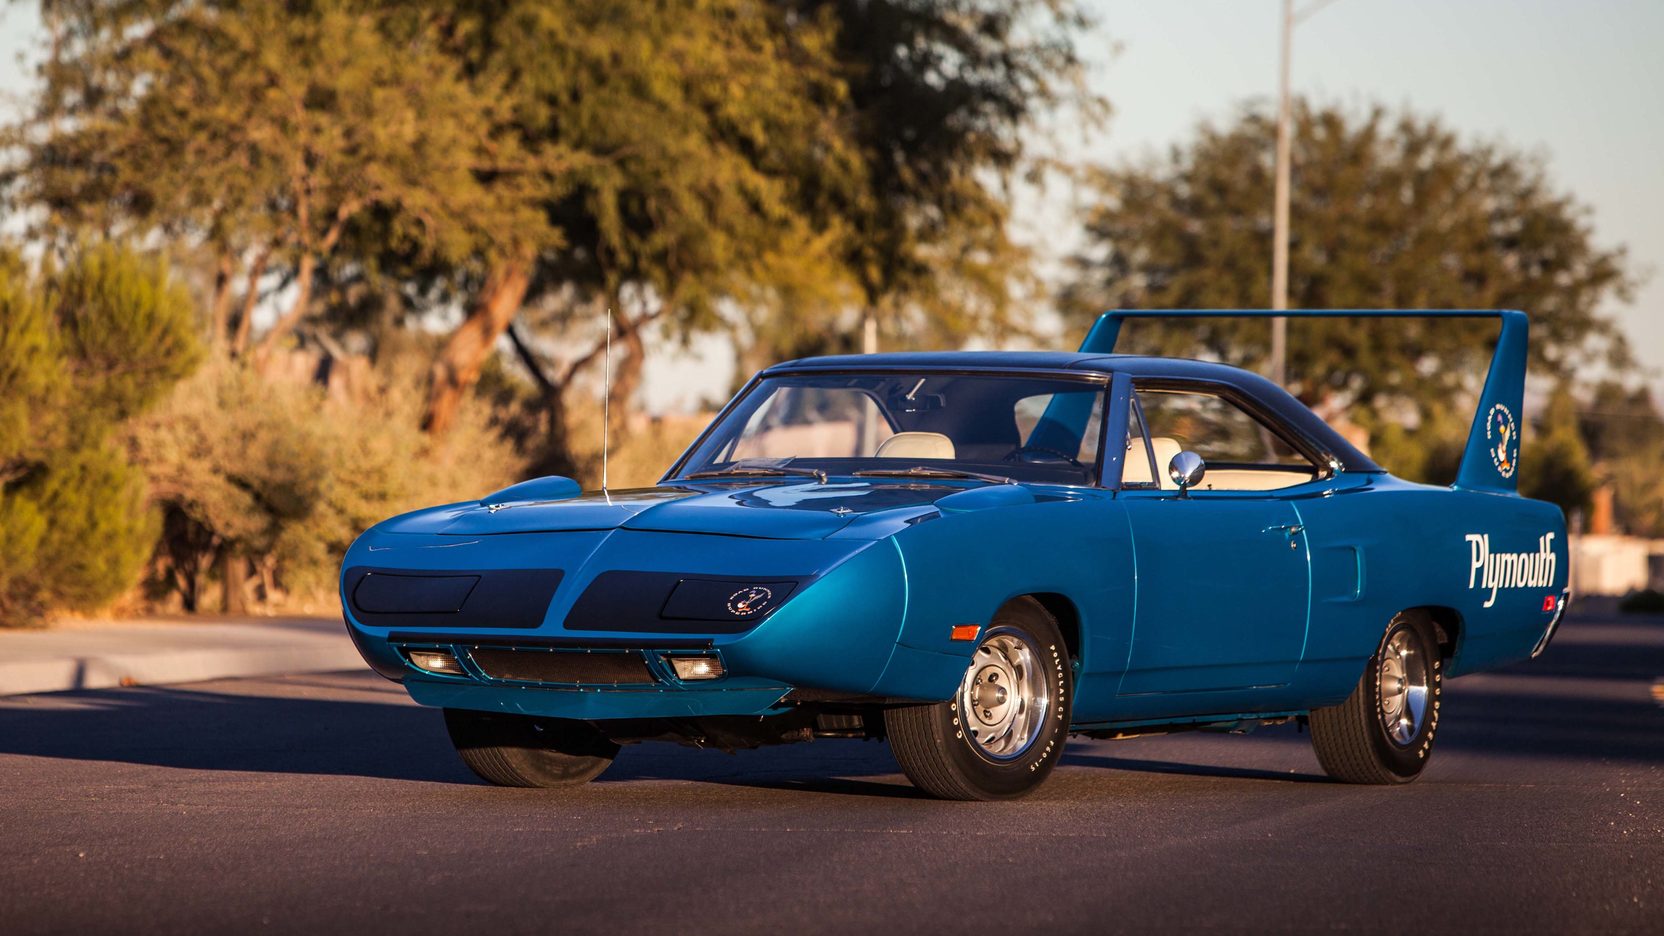 Images of 1970 Plymouth Superbird | 1664x936